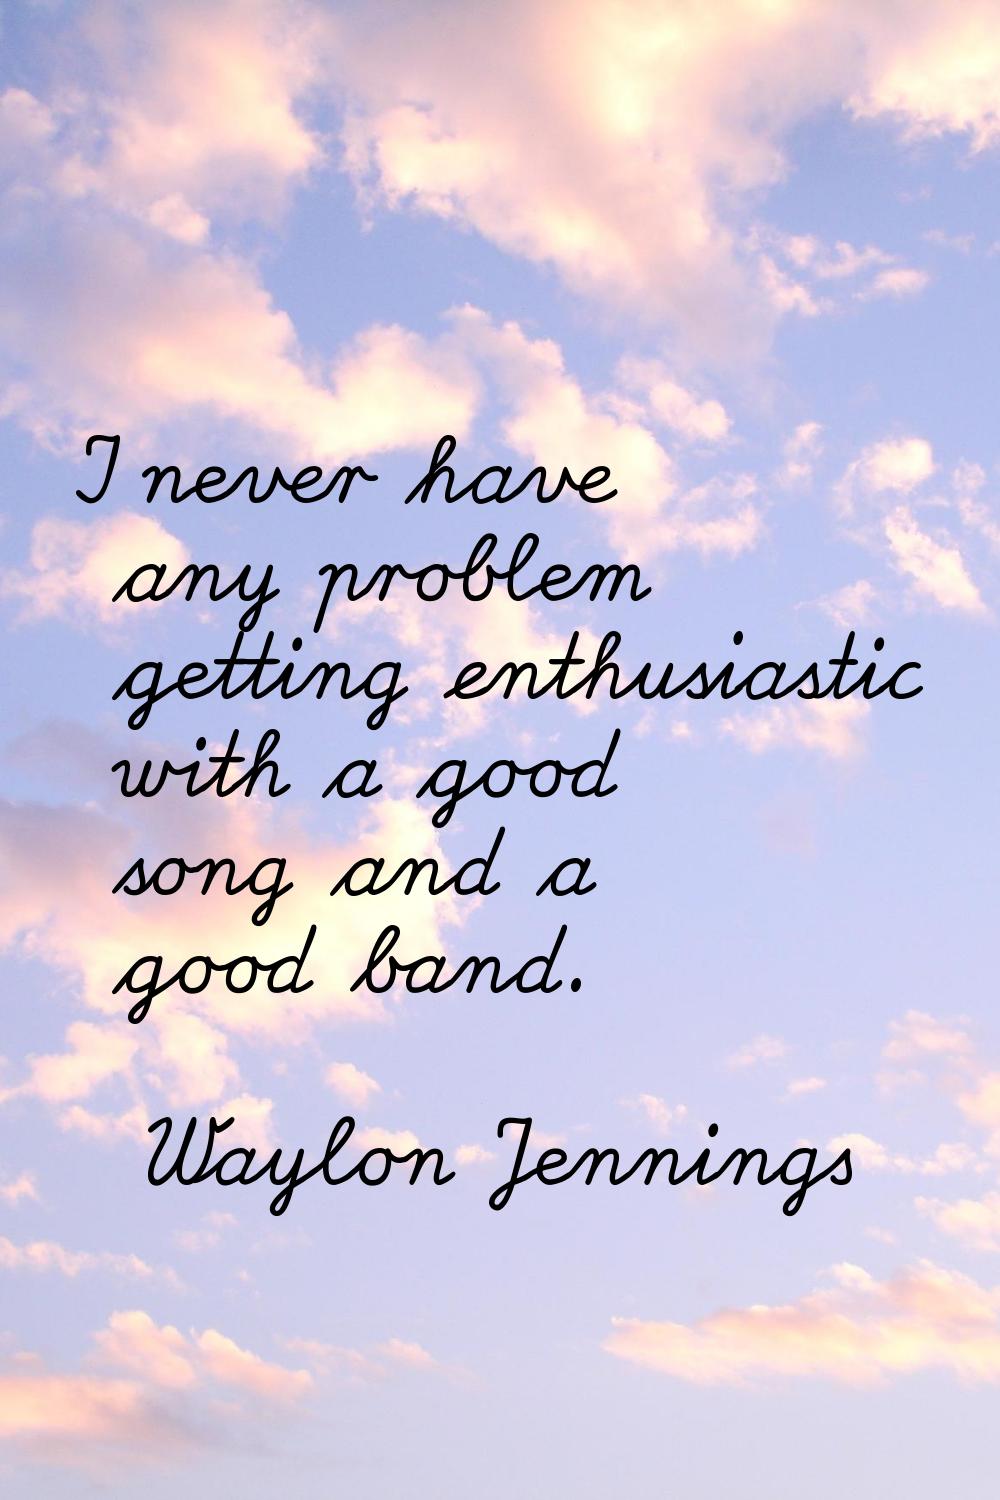 I never have any problem getting enthusiastic with a good song and a good band.